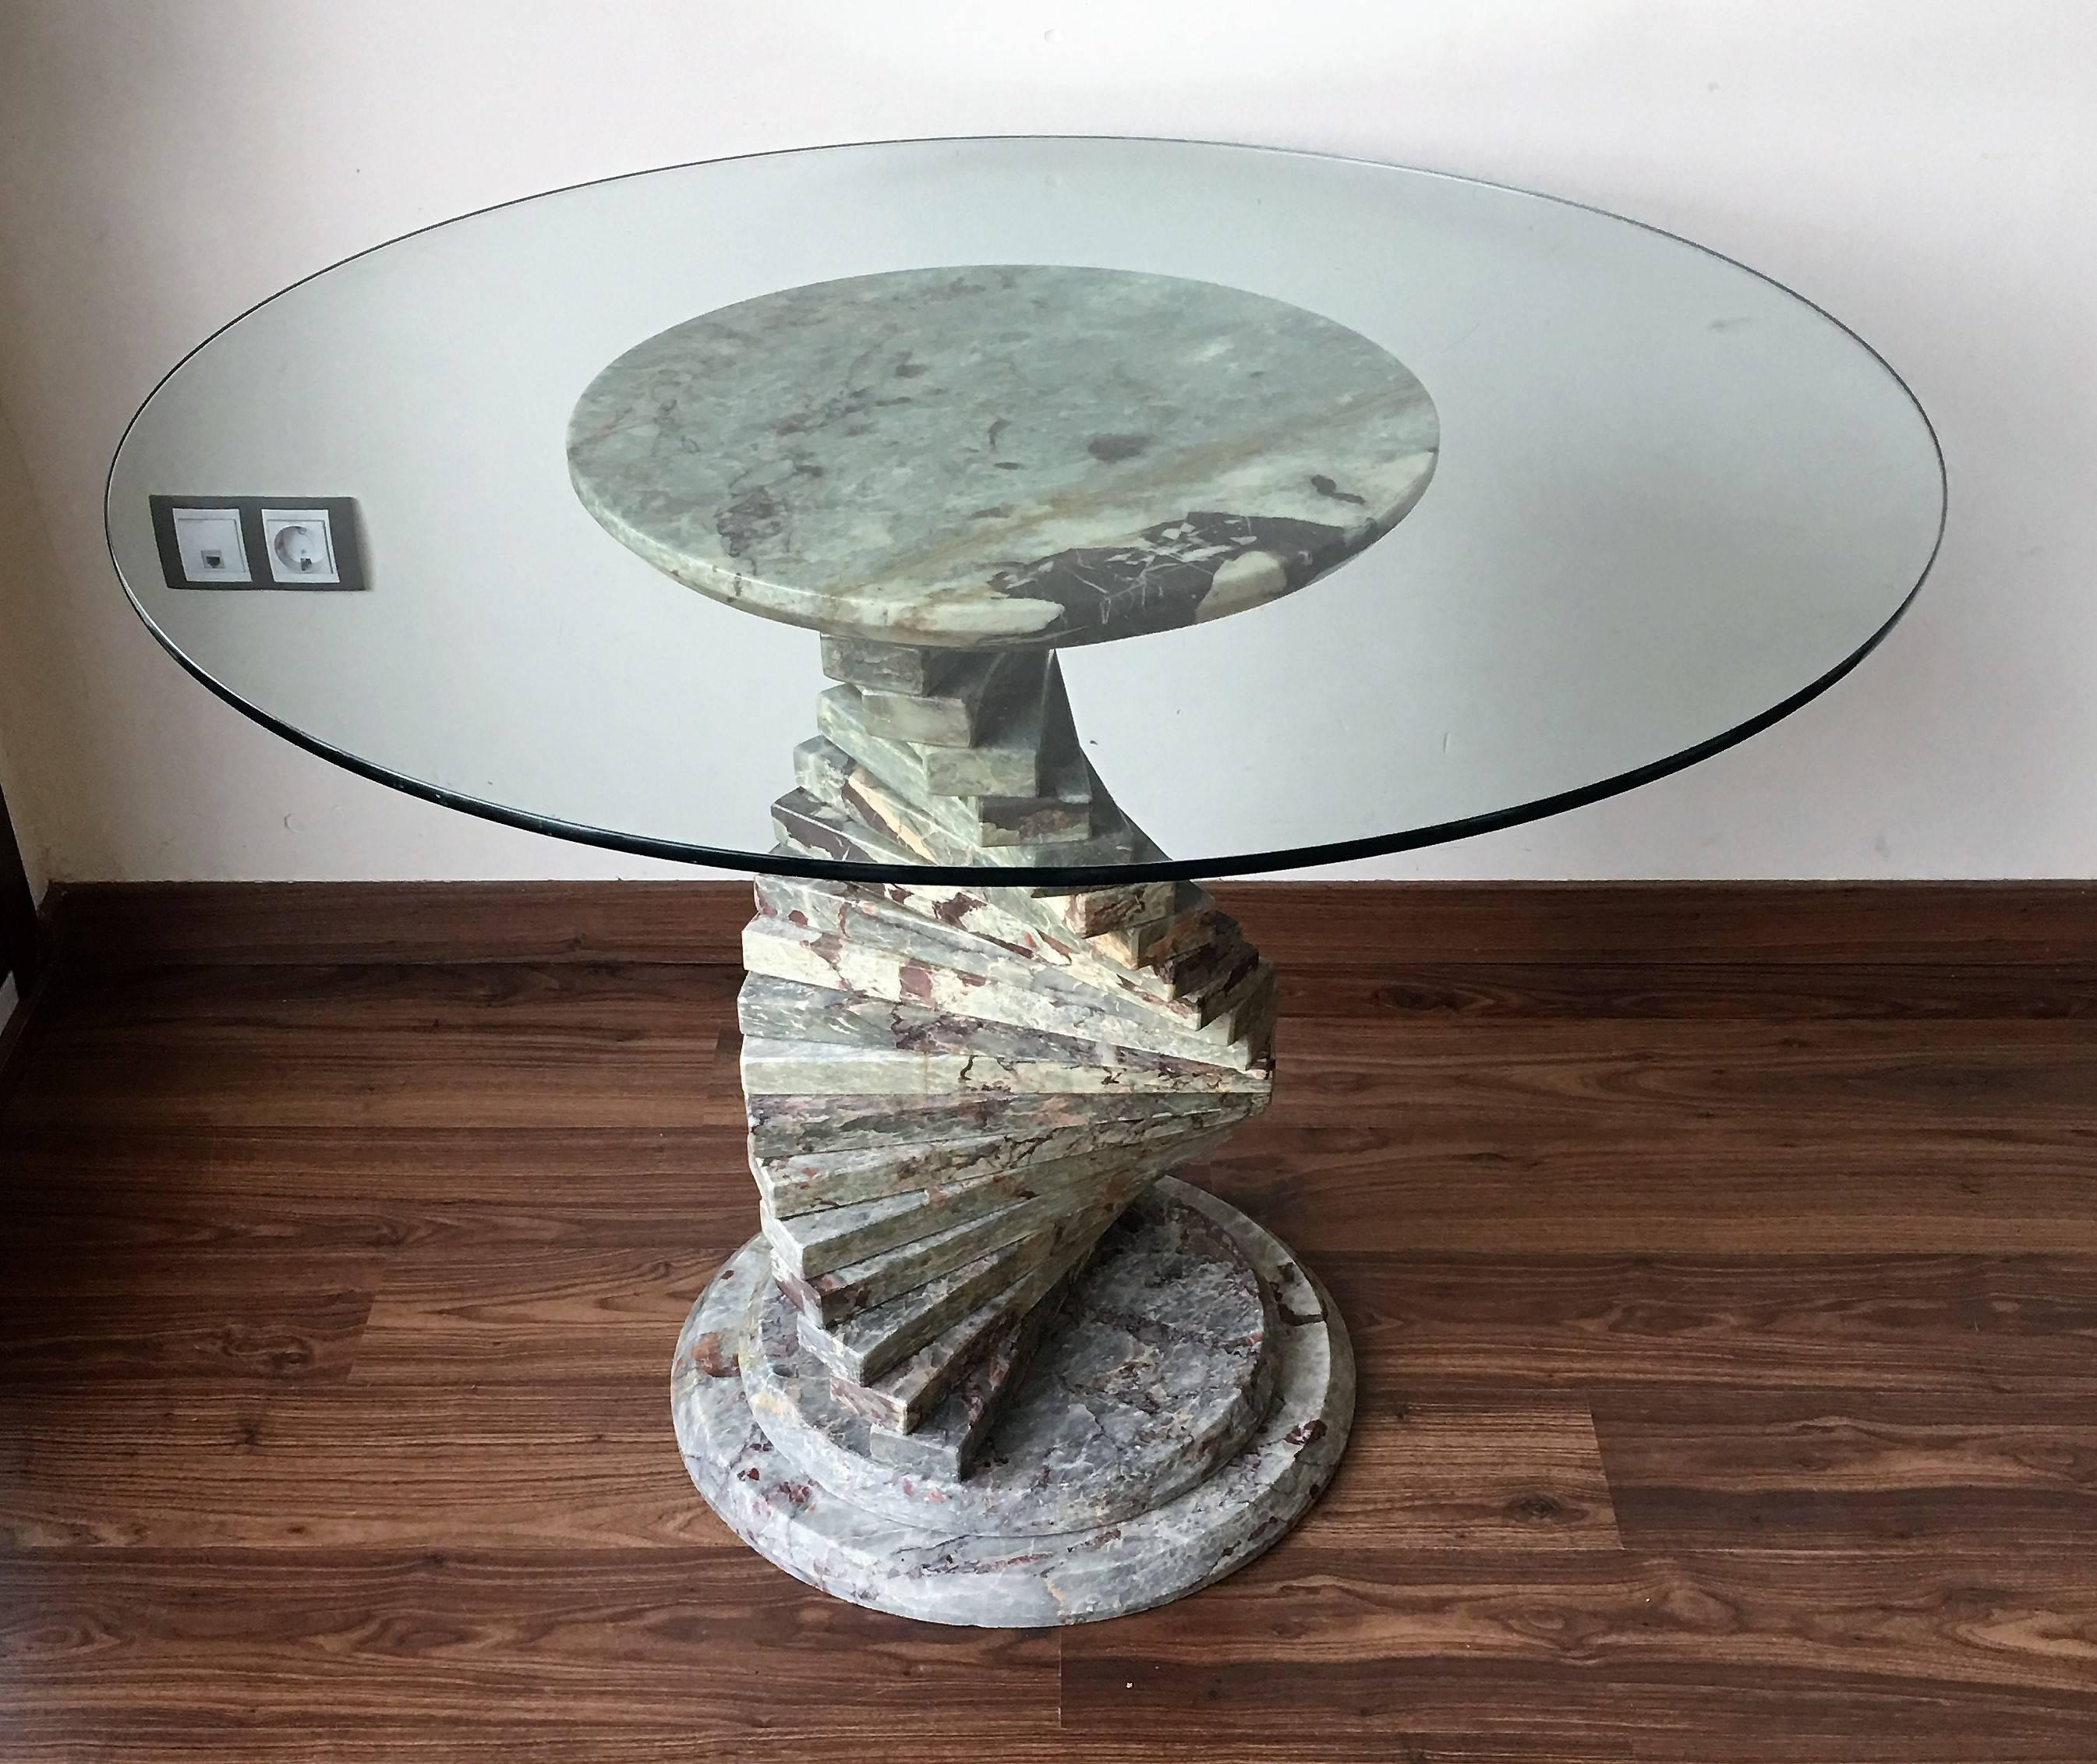 Art Deco pedestal marble dining or coffee table with round glass top

Ideal for a kitchen

Measurements of each piece: 13.75in x 1.25in
Floor base measurements diameter 19.25in.